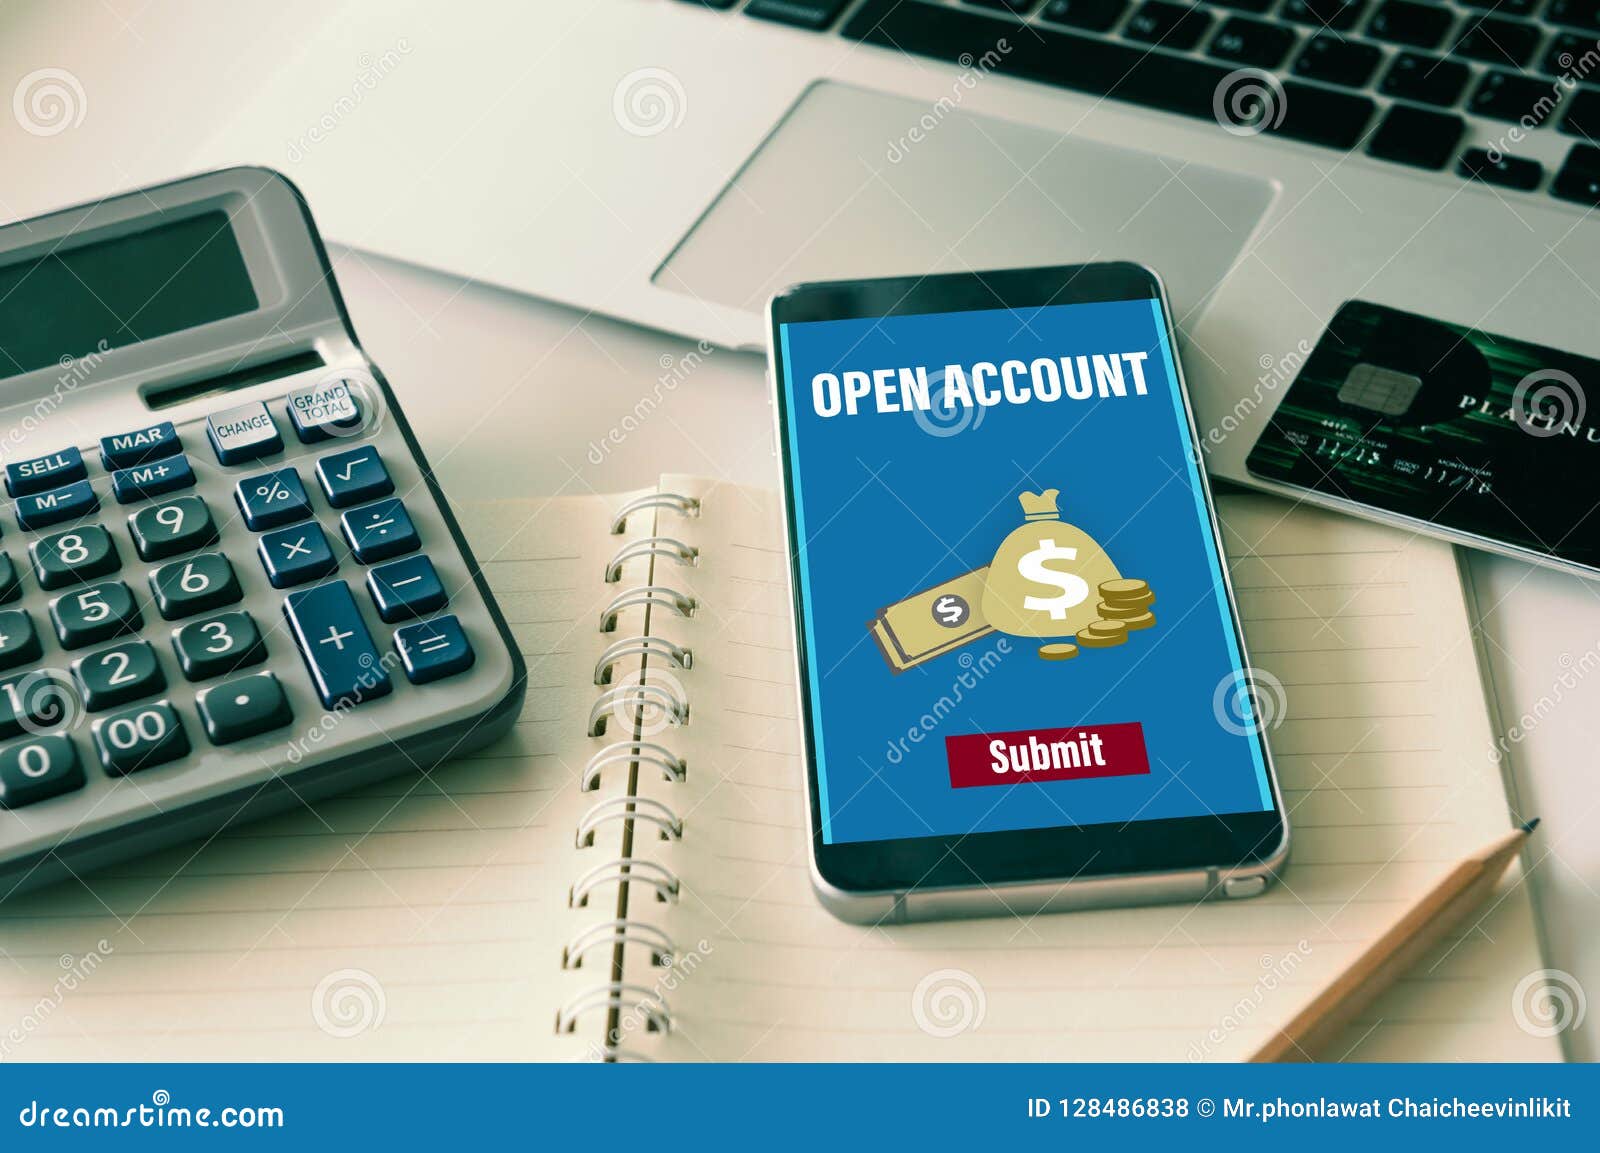 Open a bank account online stock photo. Image of account - 13